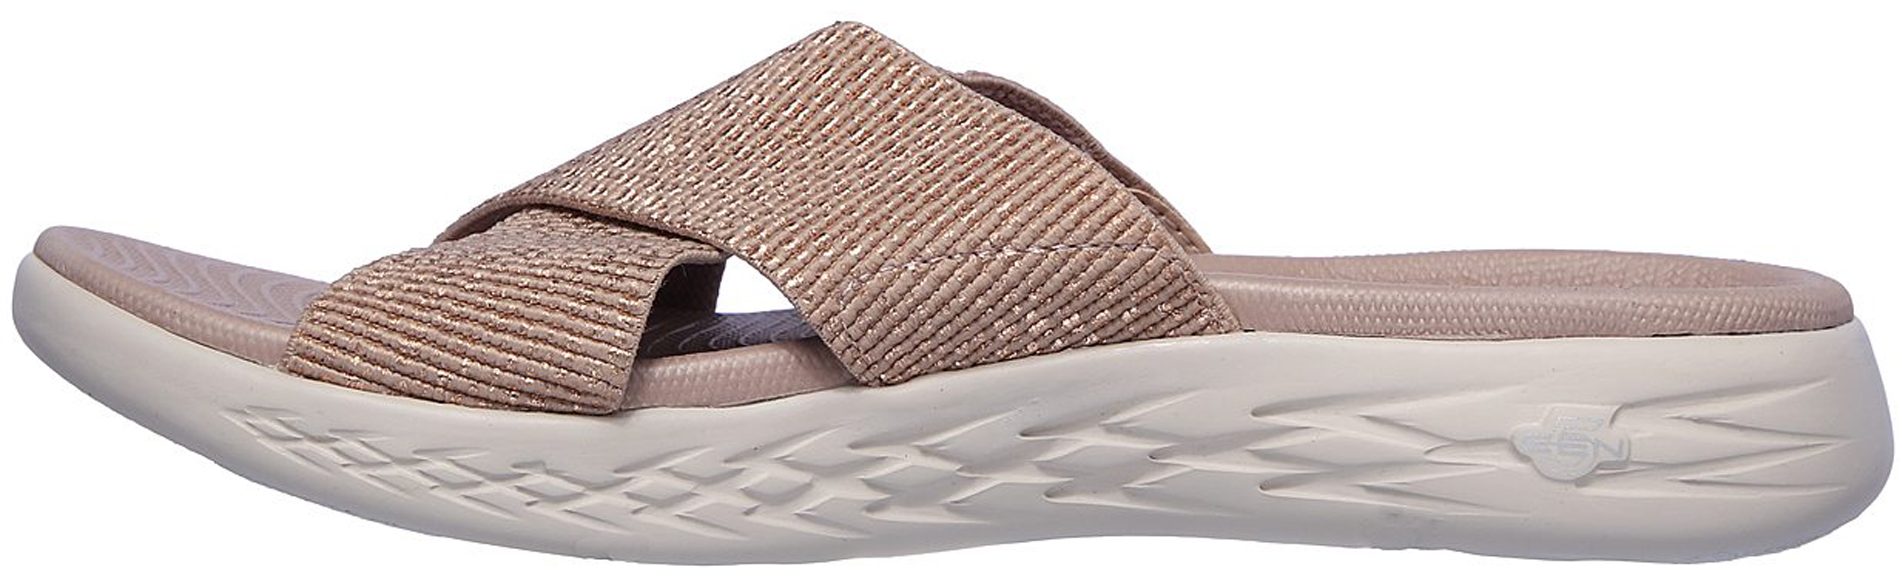 Skechers On the GO 600 - Glistening Rosegold 16259 RSGD - Mule Sandals ...